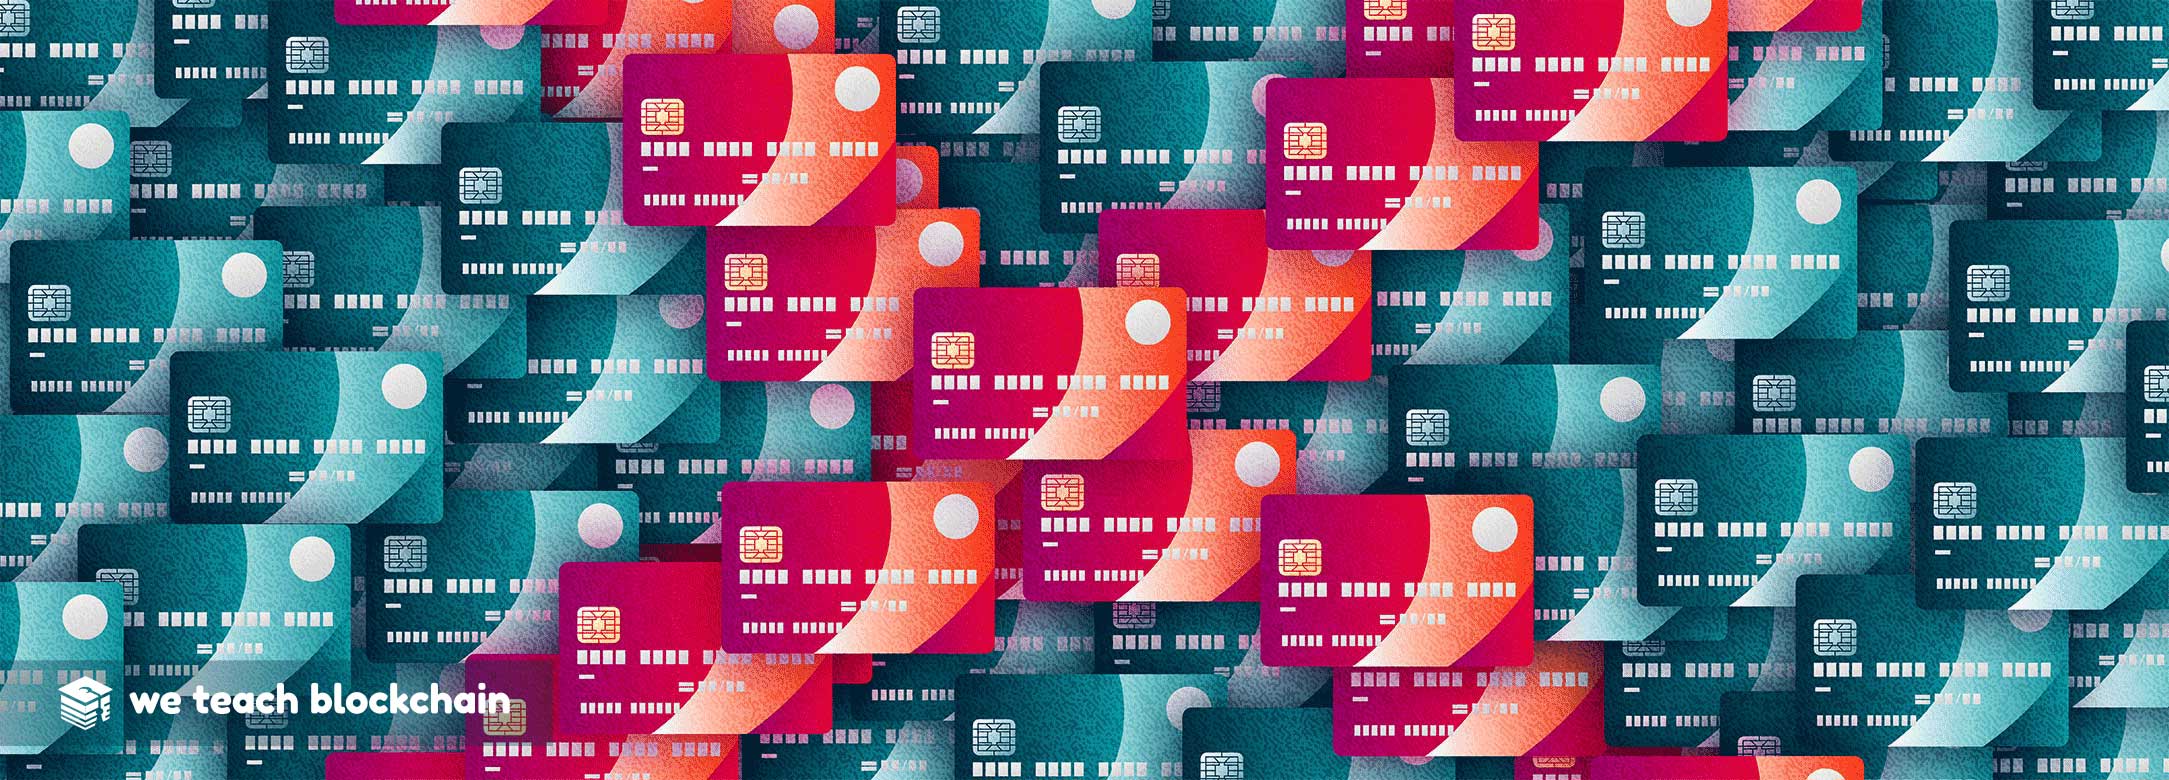 Credit cards forming an X